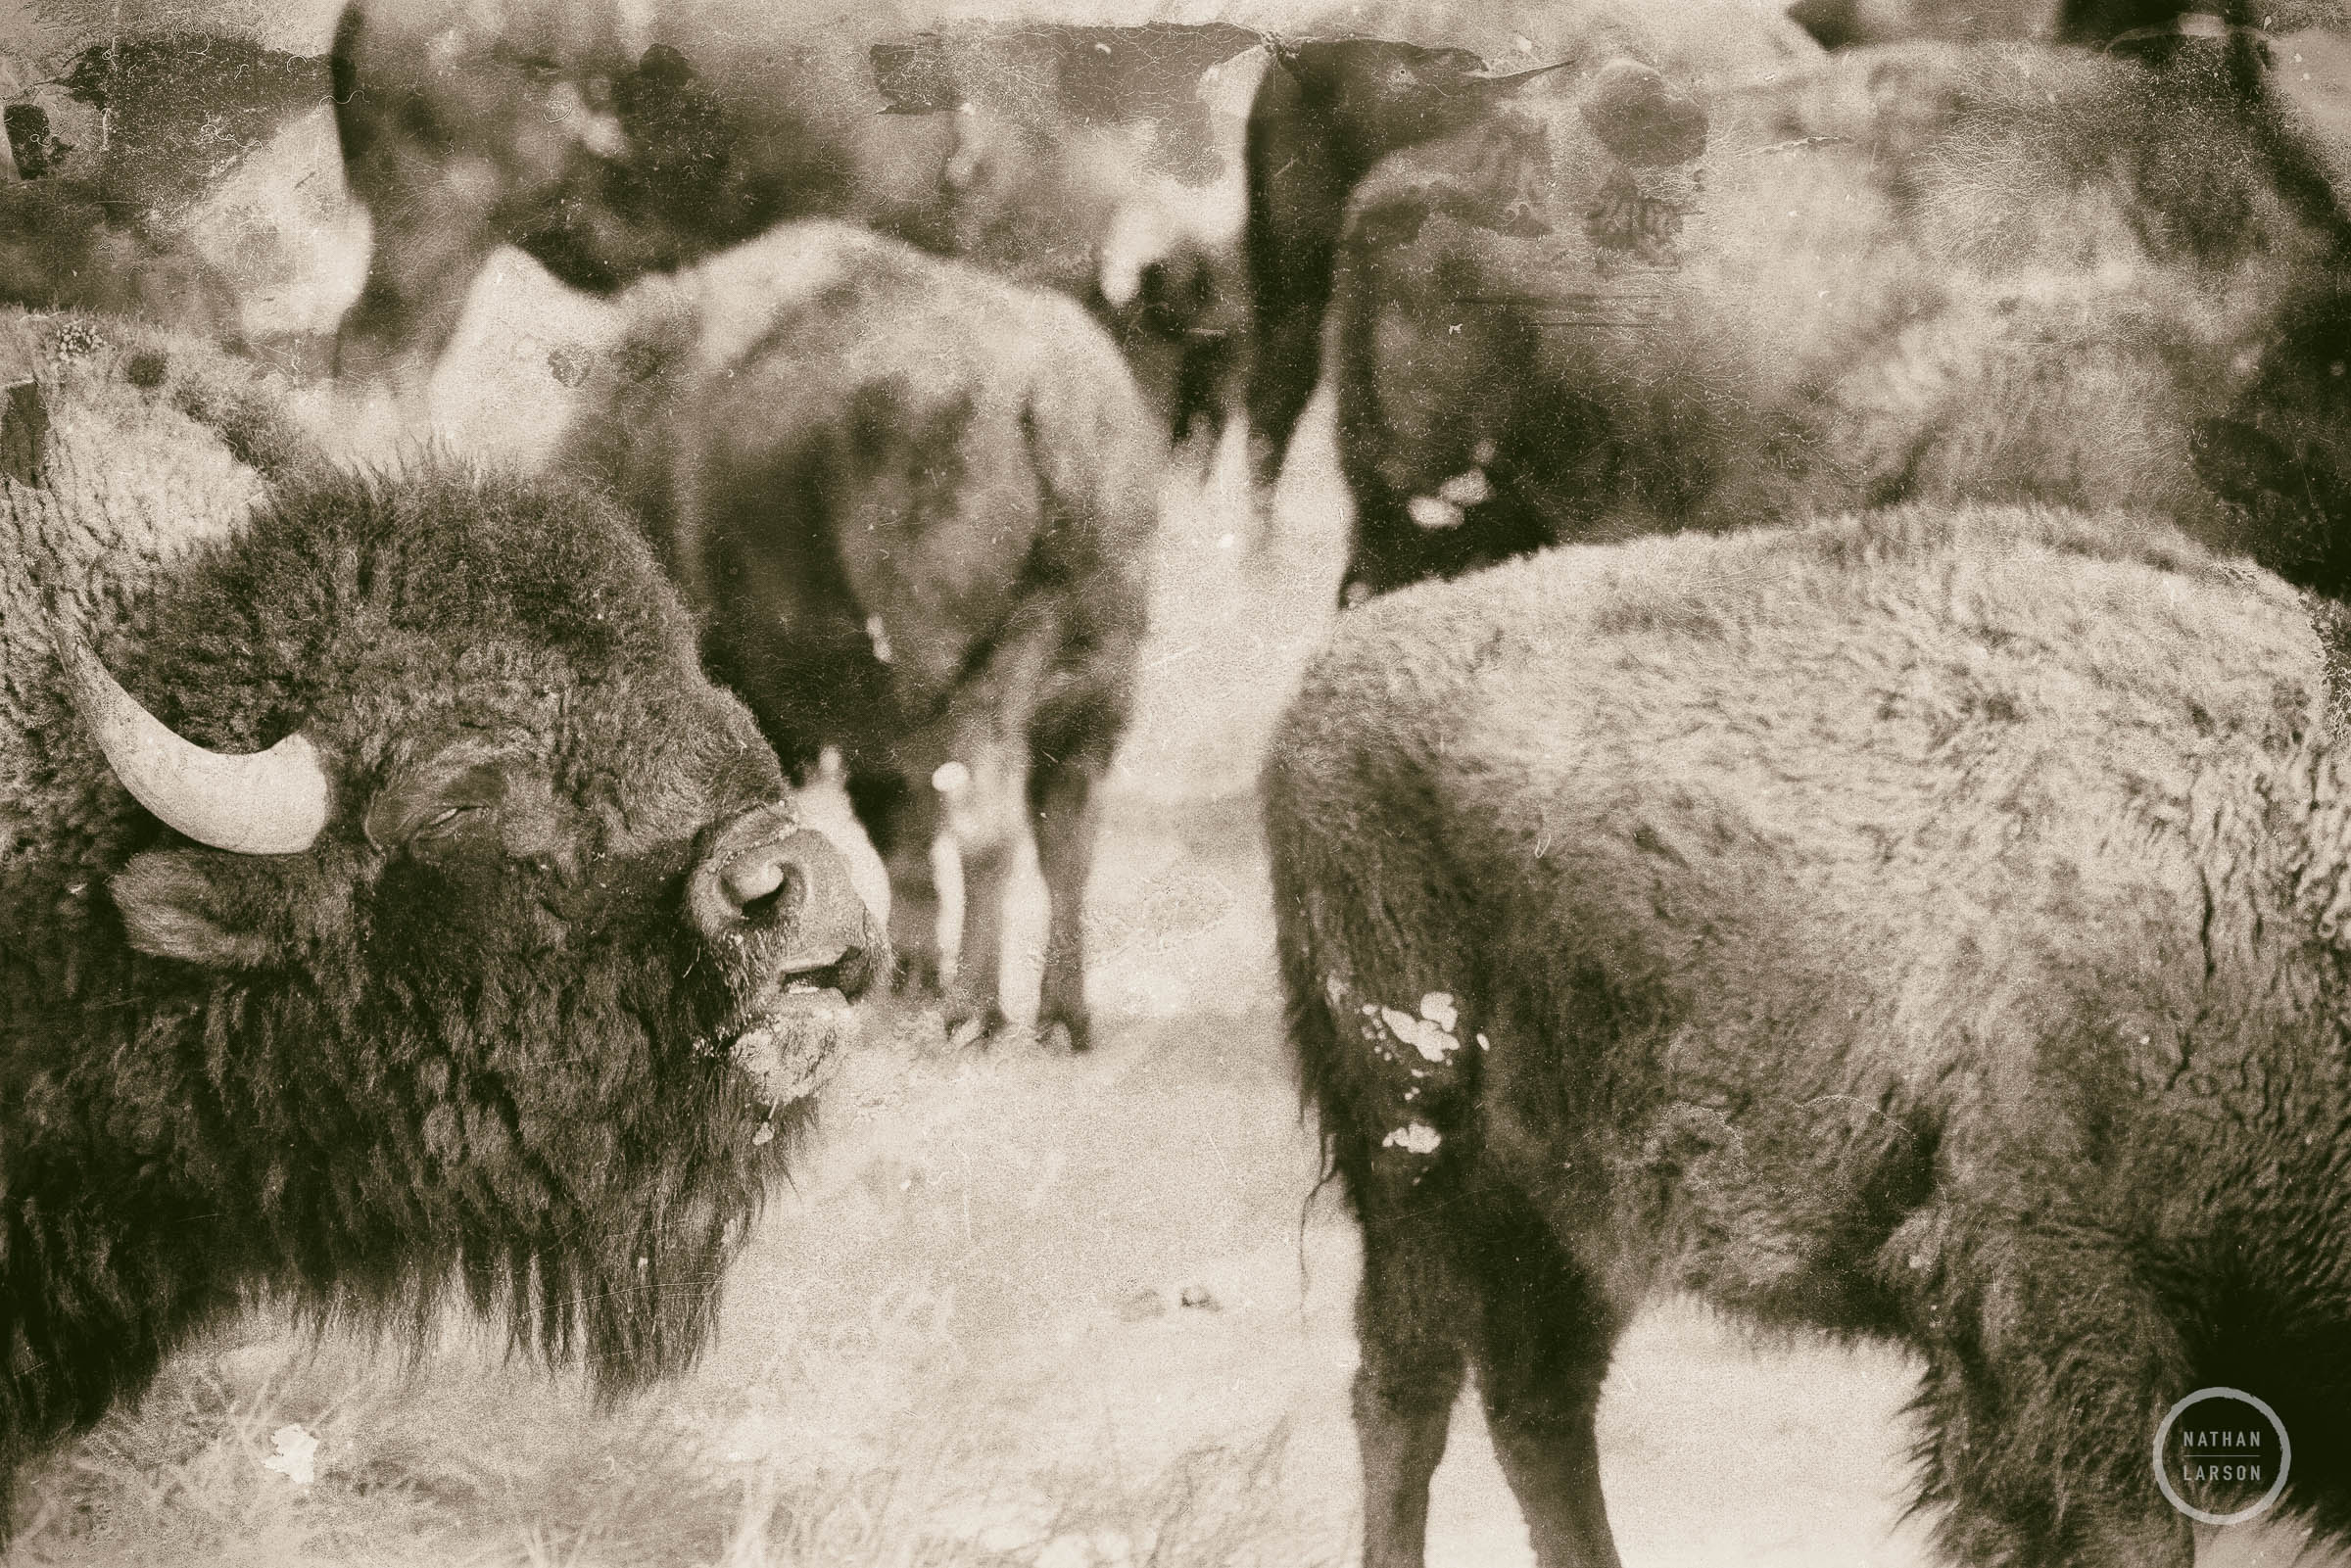 An American Bison Herd on the open range. A bull sends out a deep call and moves the herd forward.